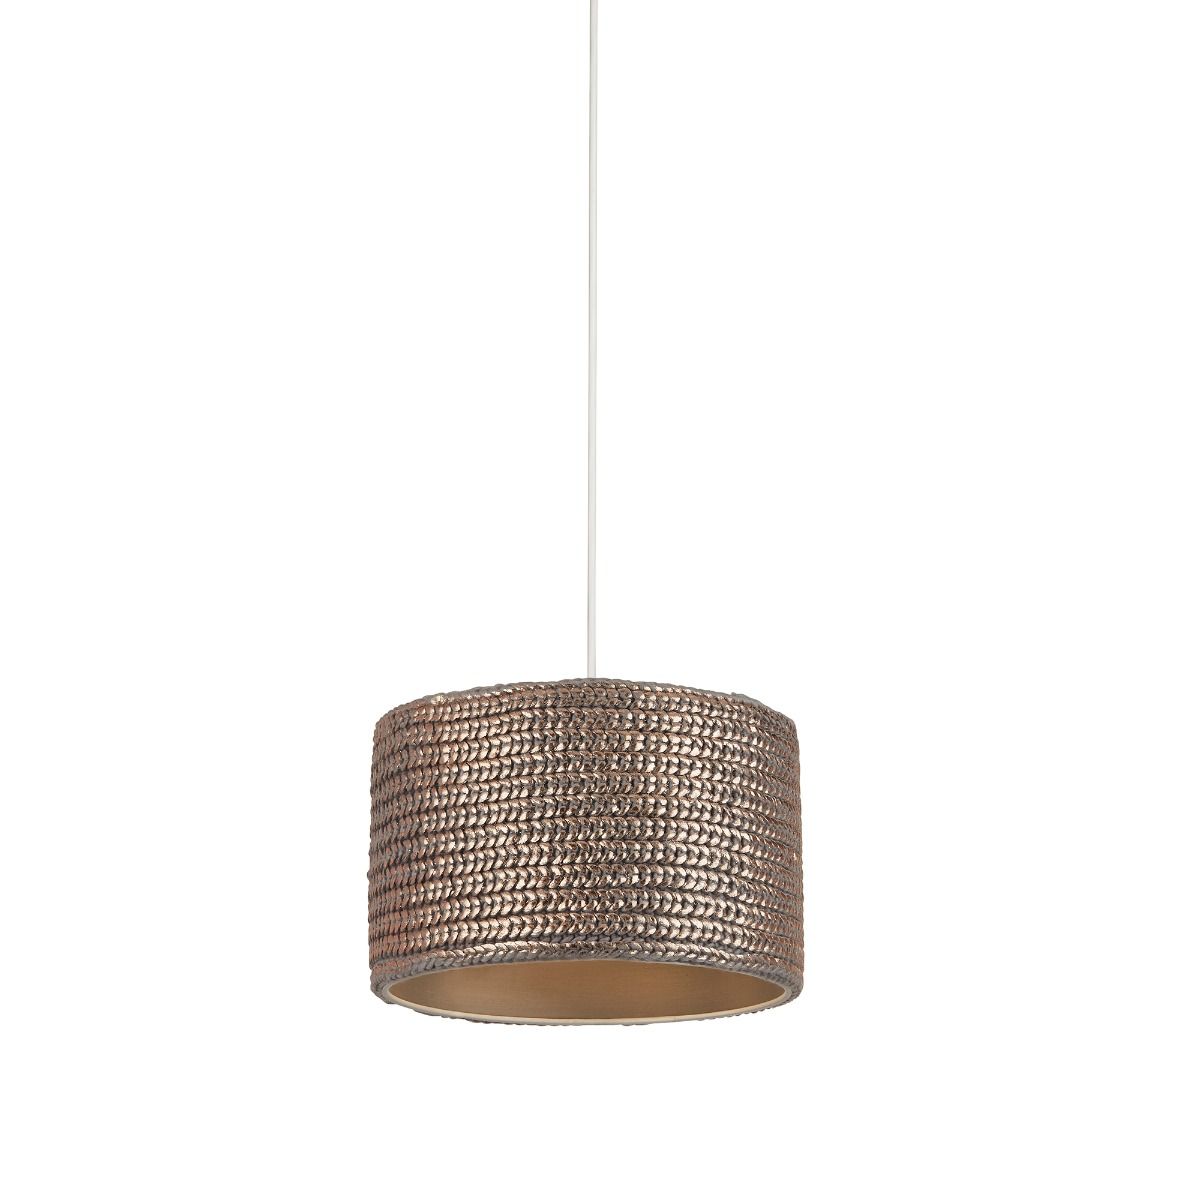 Tyreal Woven Wool Copper Shade